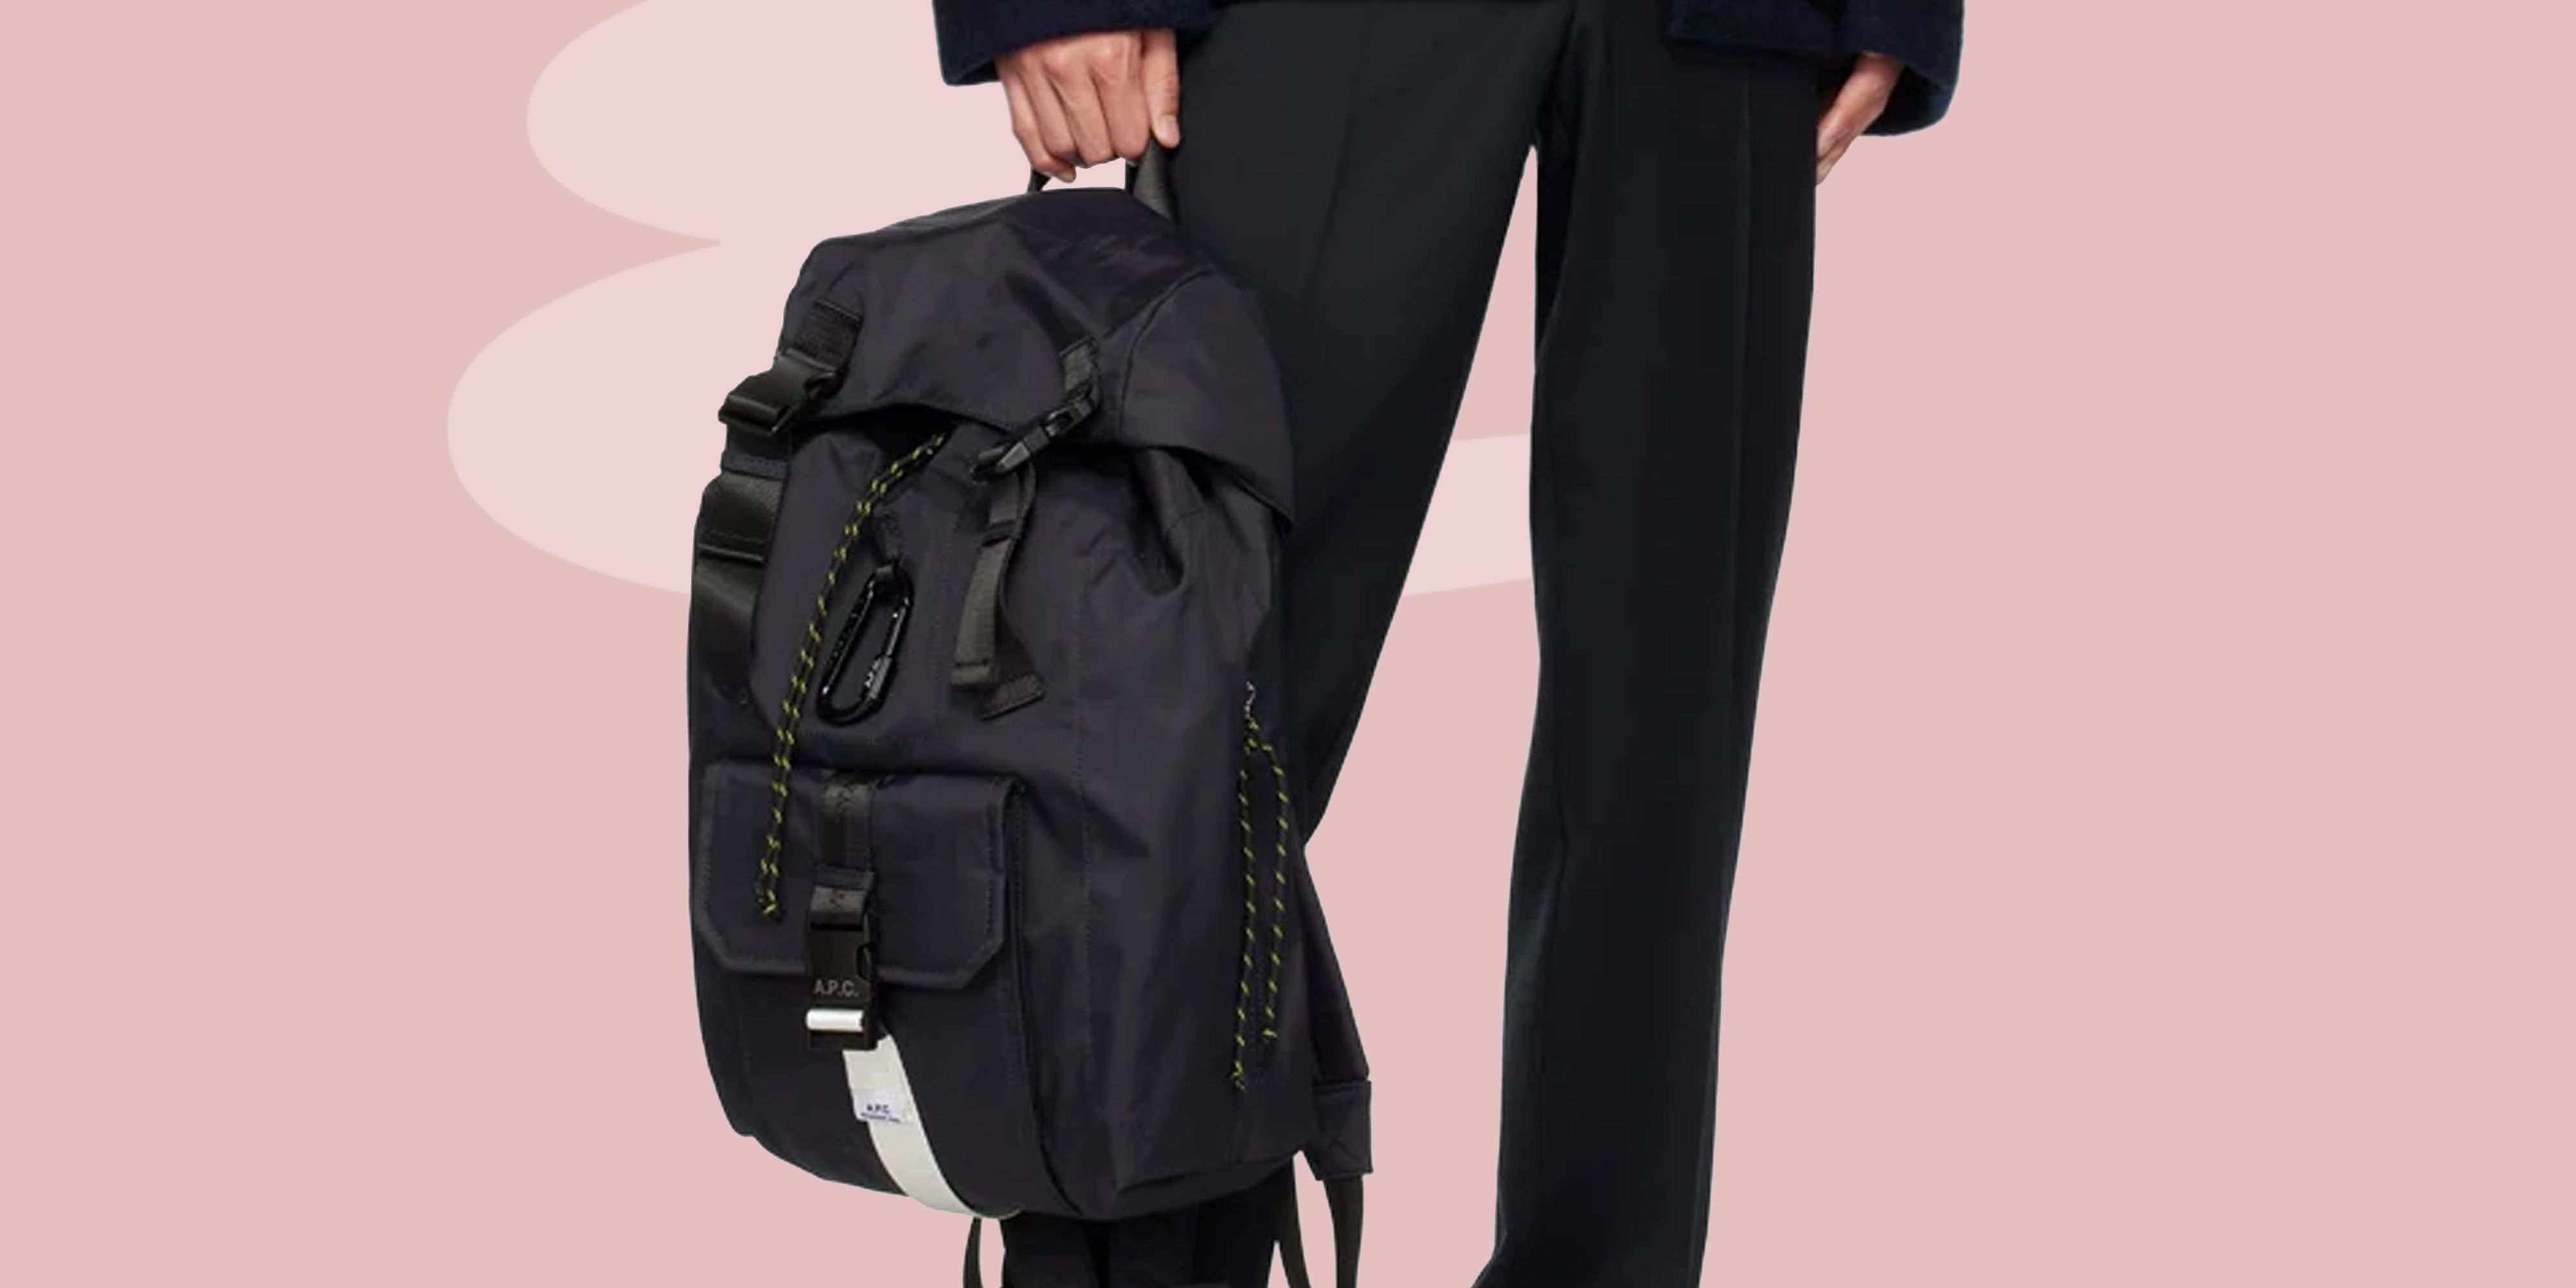 The 13 Best College Backpacks